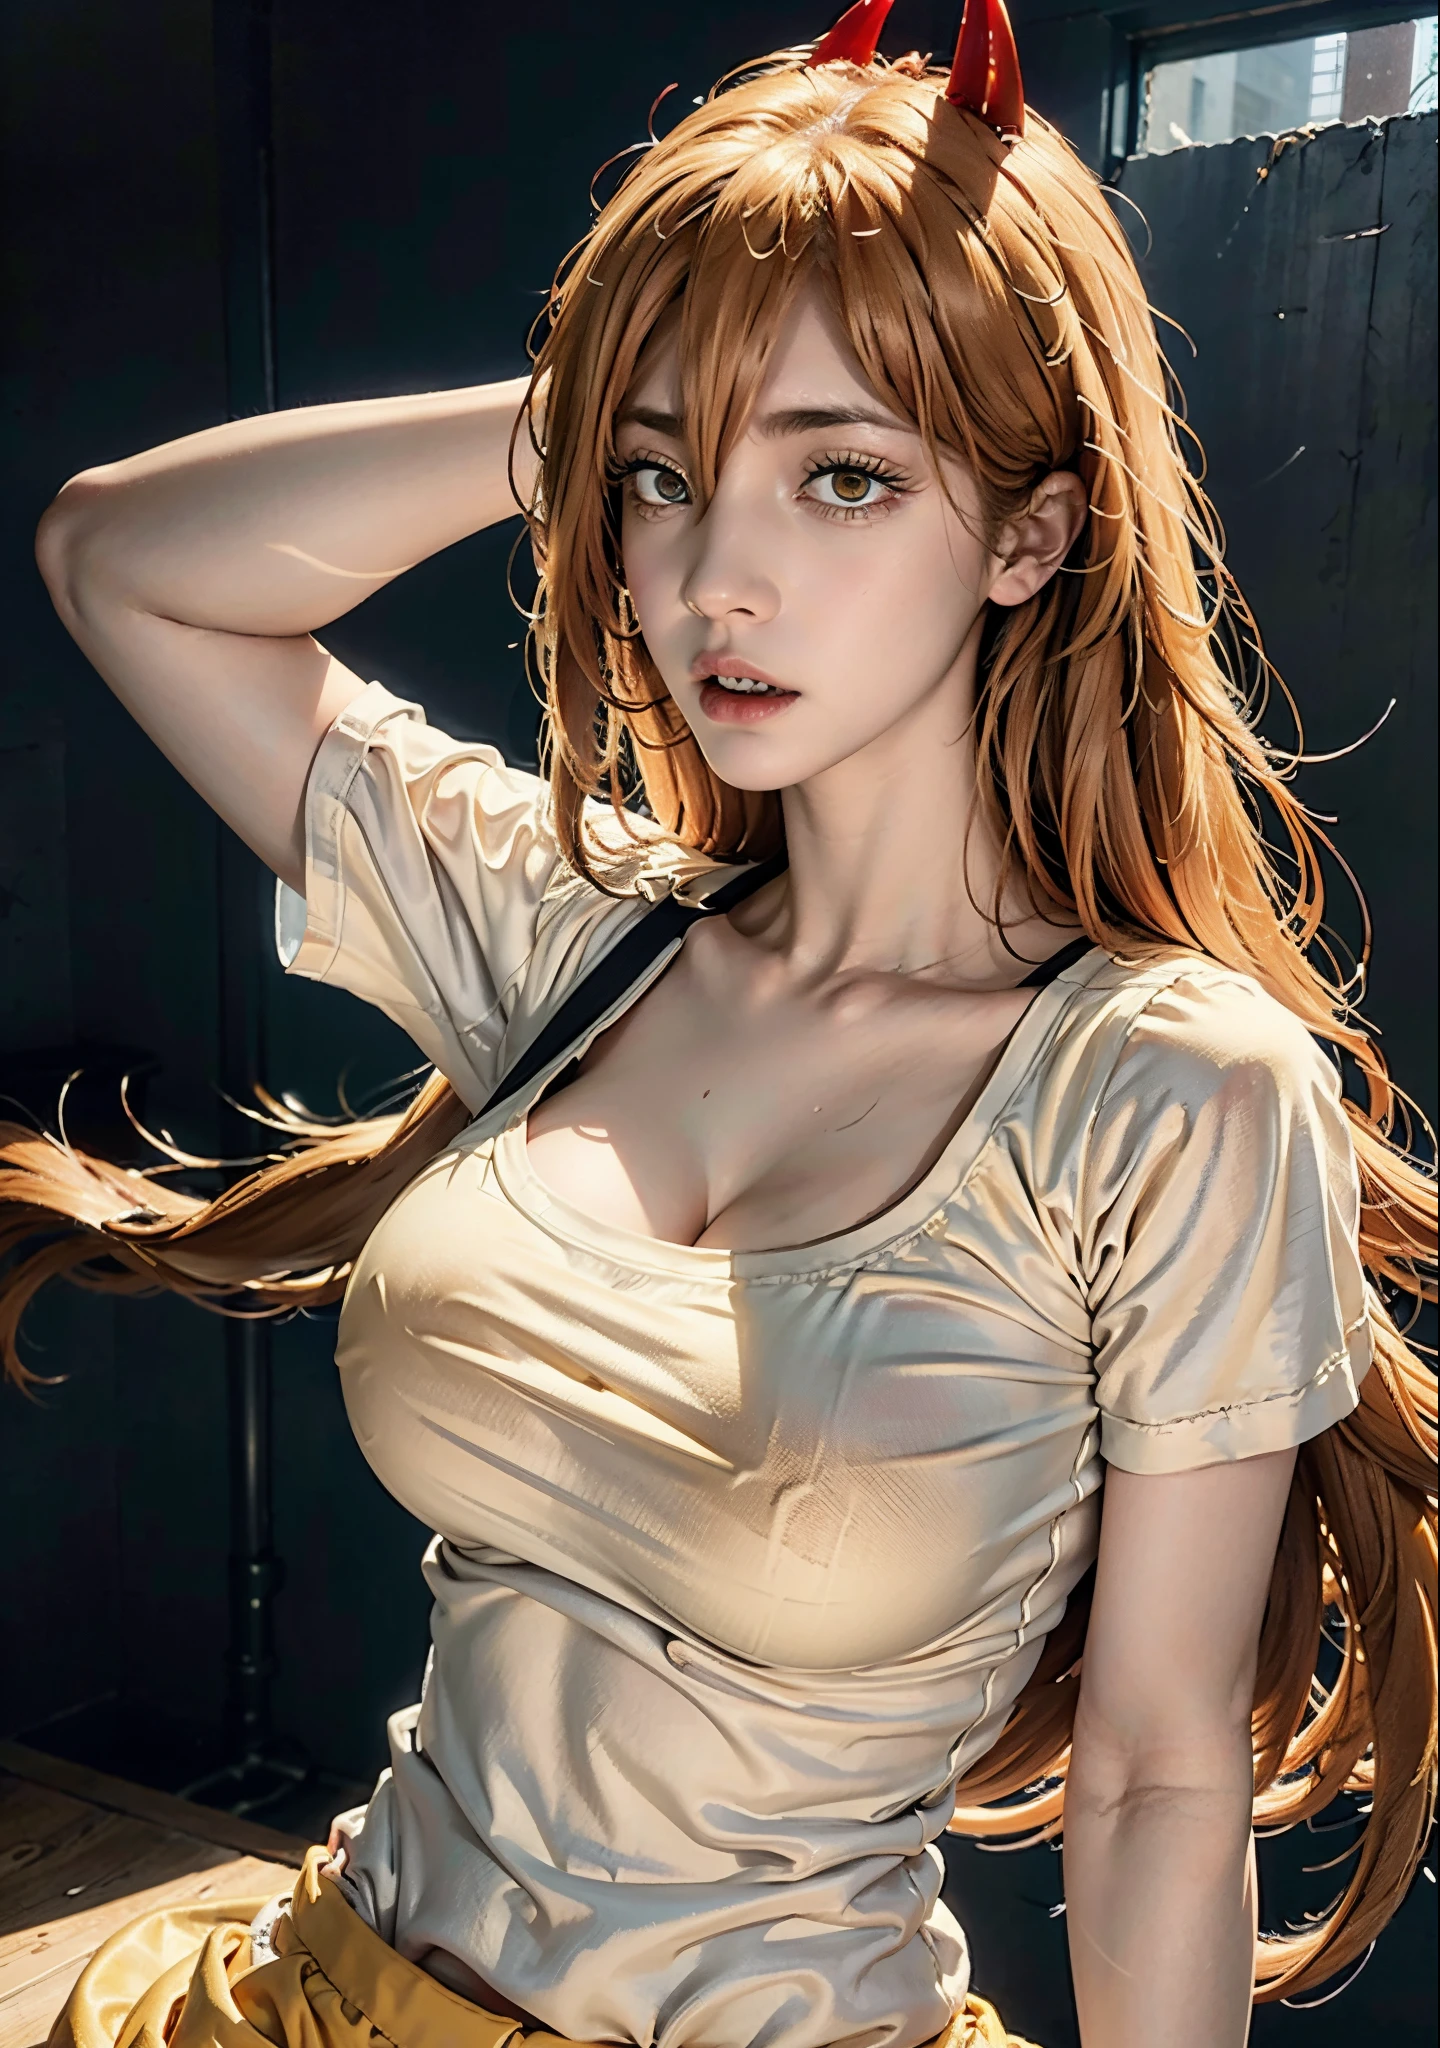 1 Girl,power \(Chainsaw Man\),Golden hair,Red horns,Yellow eyes,Cross eyes,Open mouth,shy,a white T-shirt,large full breasts,
BAPV,(Masterpiece:1,2), Best Quality,Masterpiece,high resolucion,Original,very detailed wallpaper,perfect light,